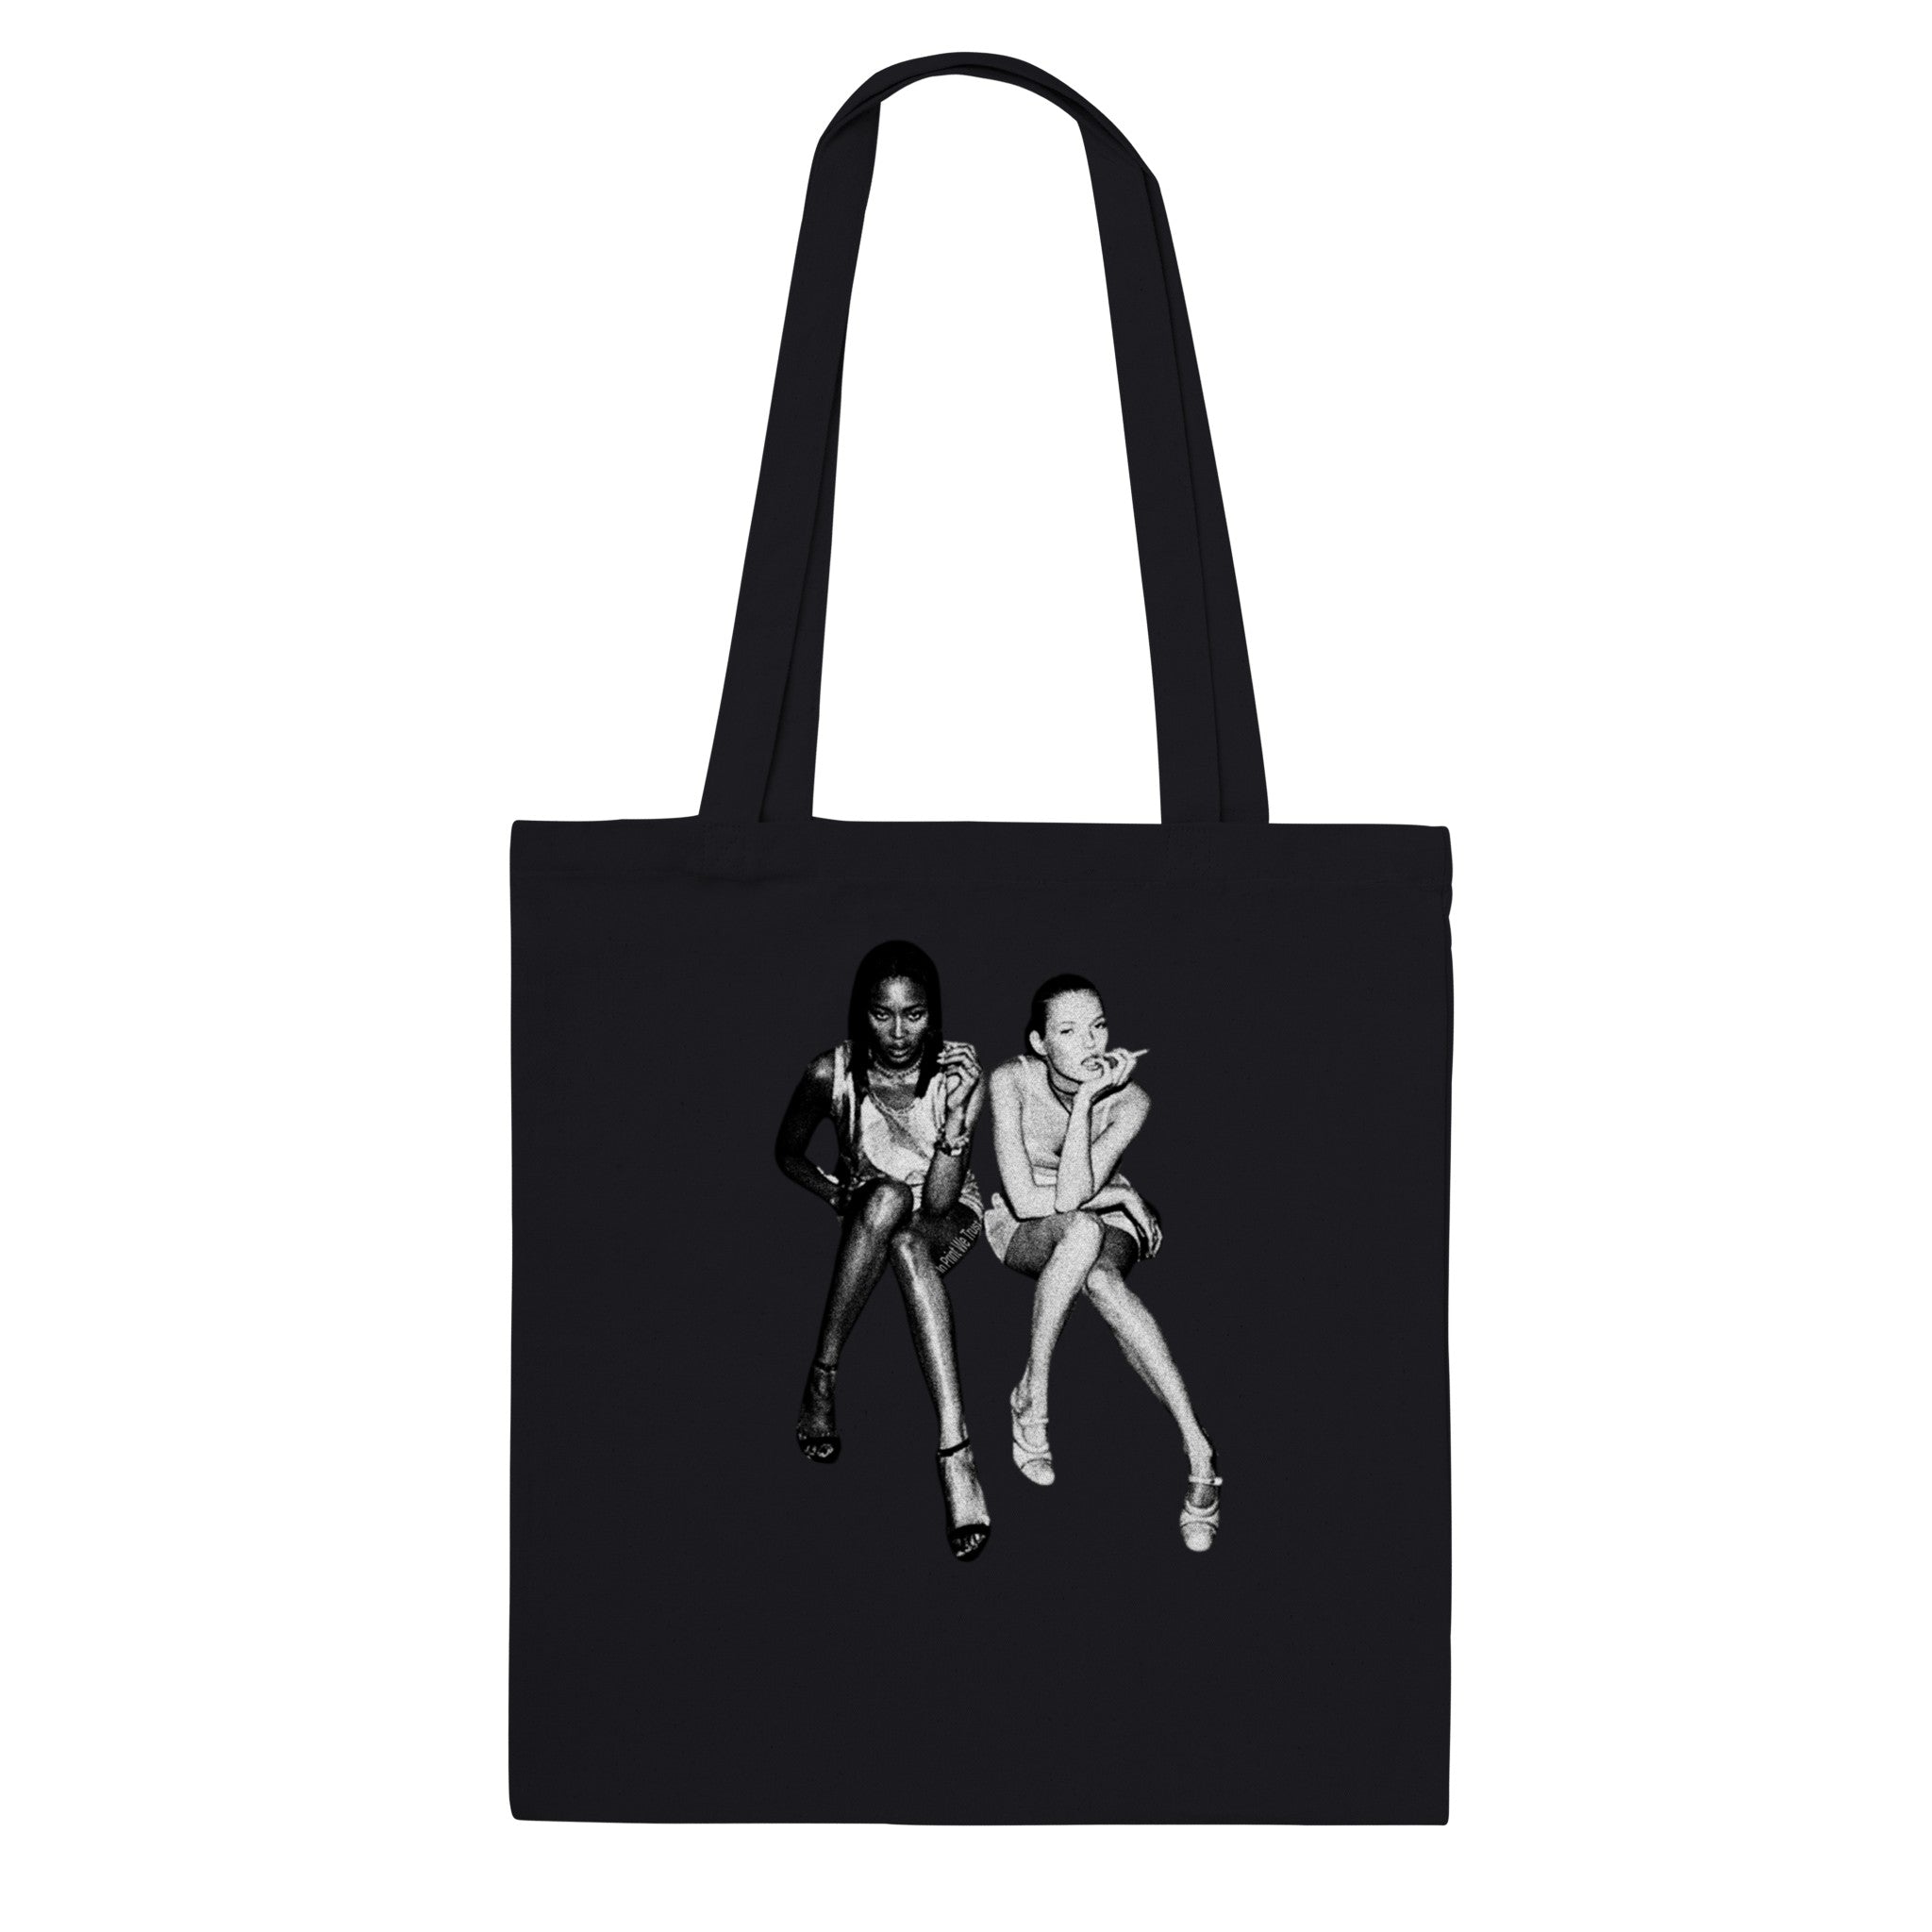 'After Party' tote bag - In Print We Trust